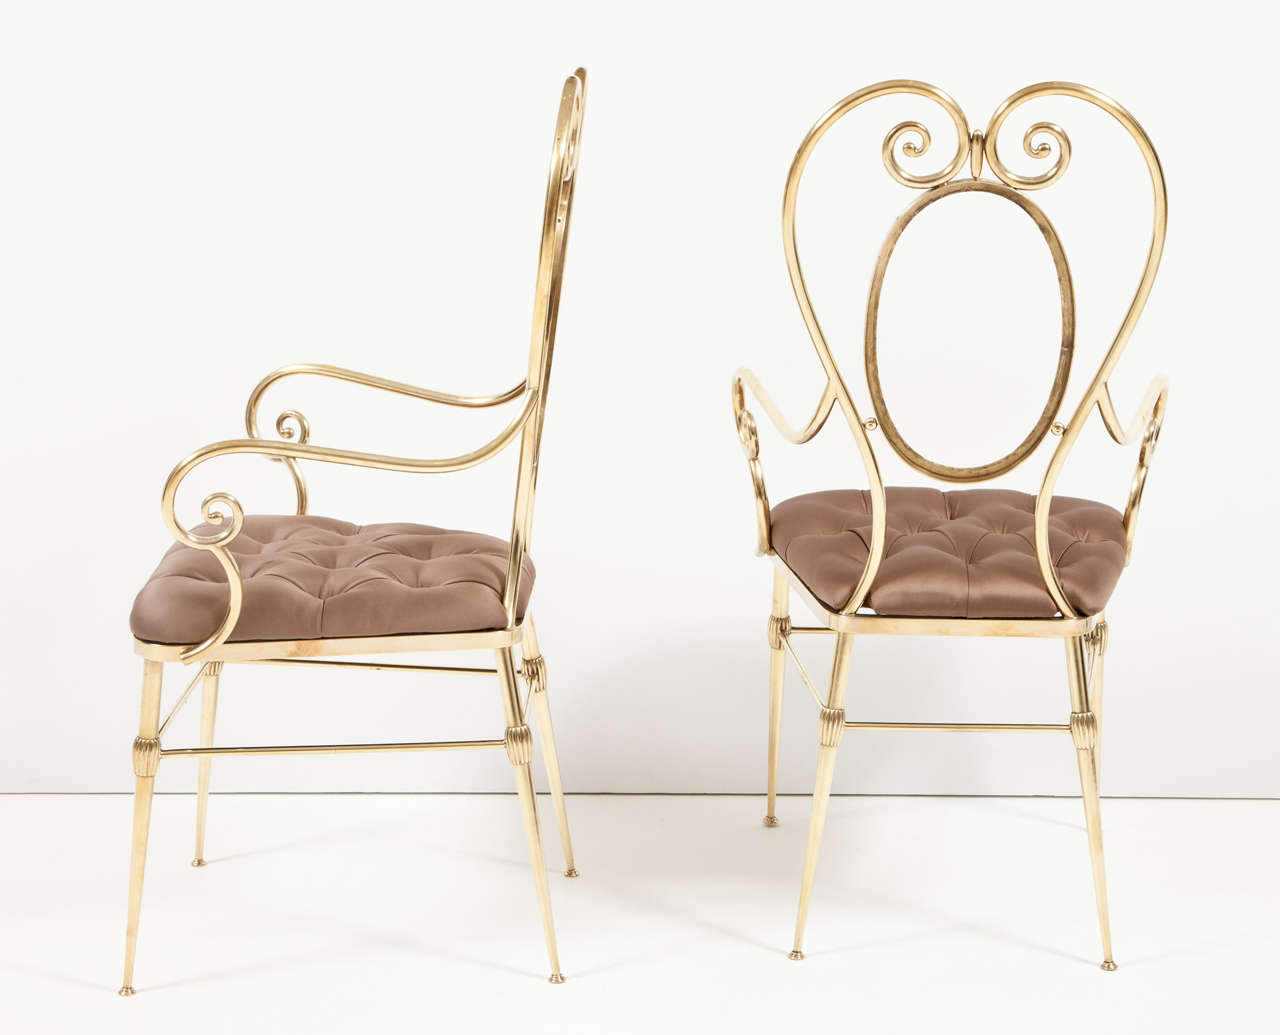 Chairs, Pair of Brass Chairs with Silk Upholstery, Brass Leg, Mid-Century Design For Sale 1